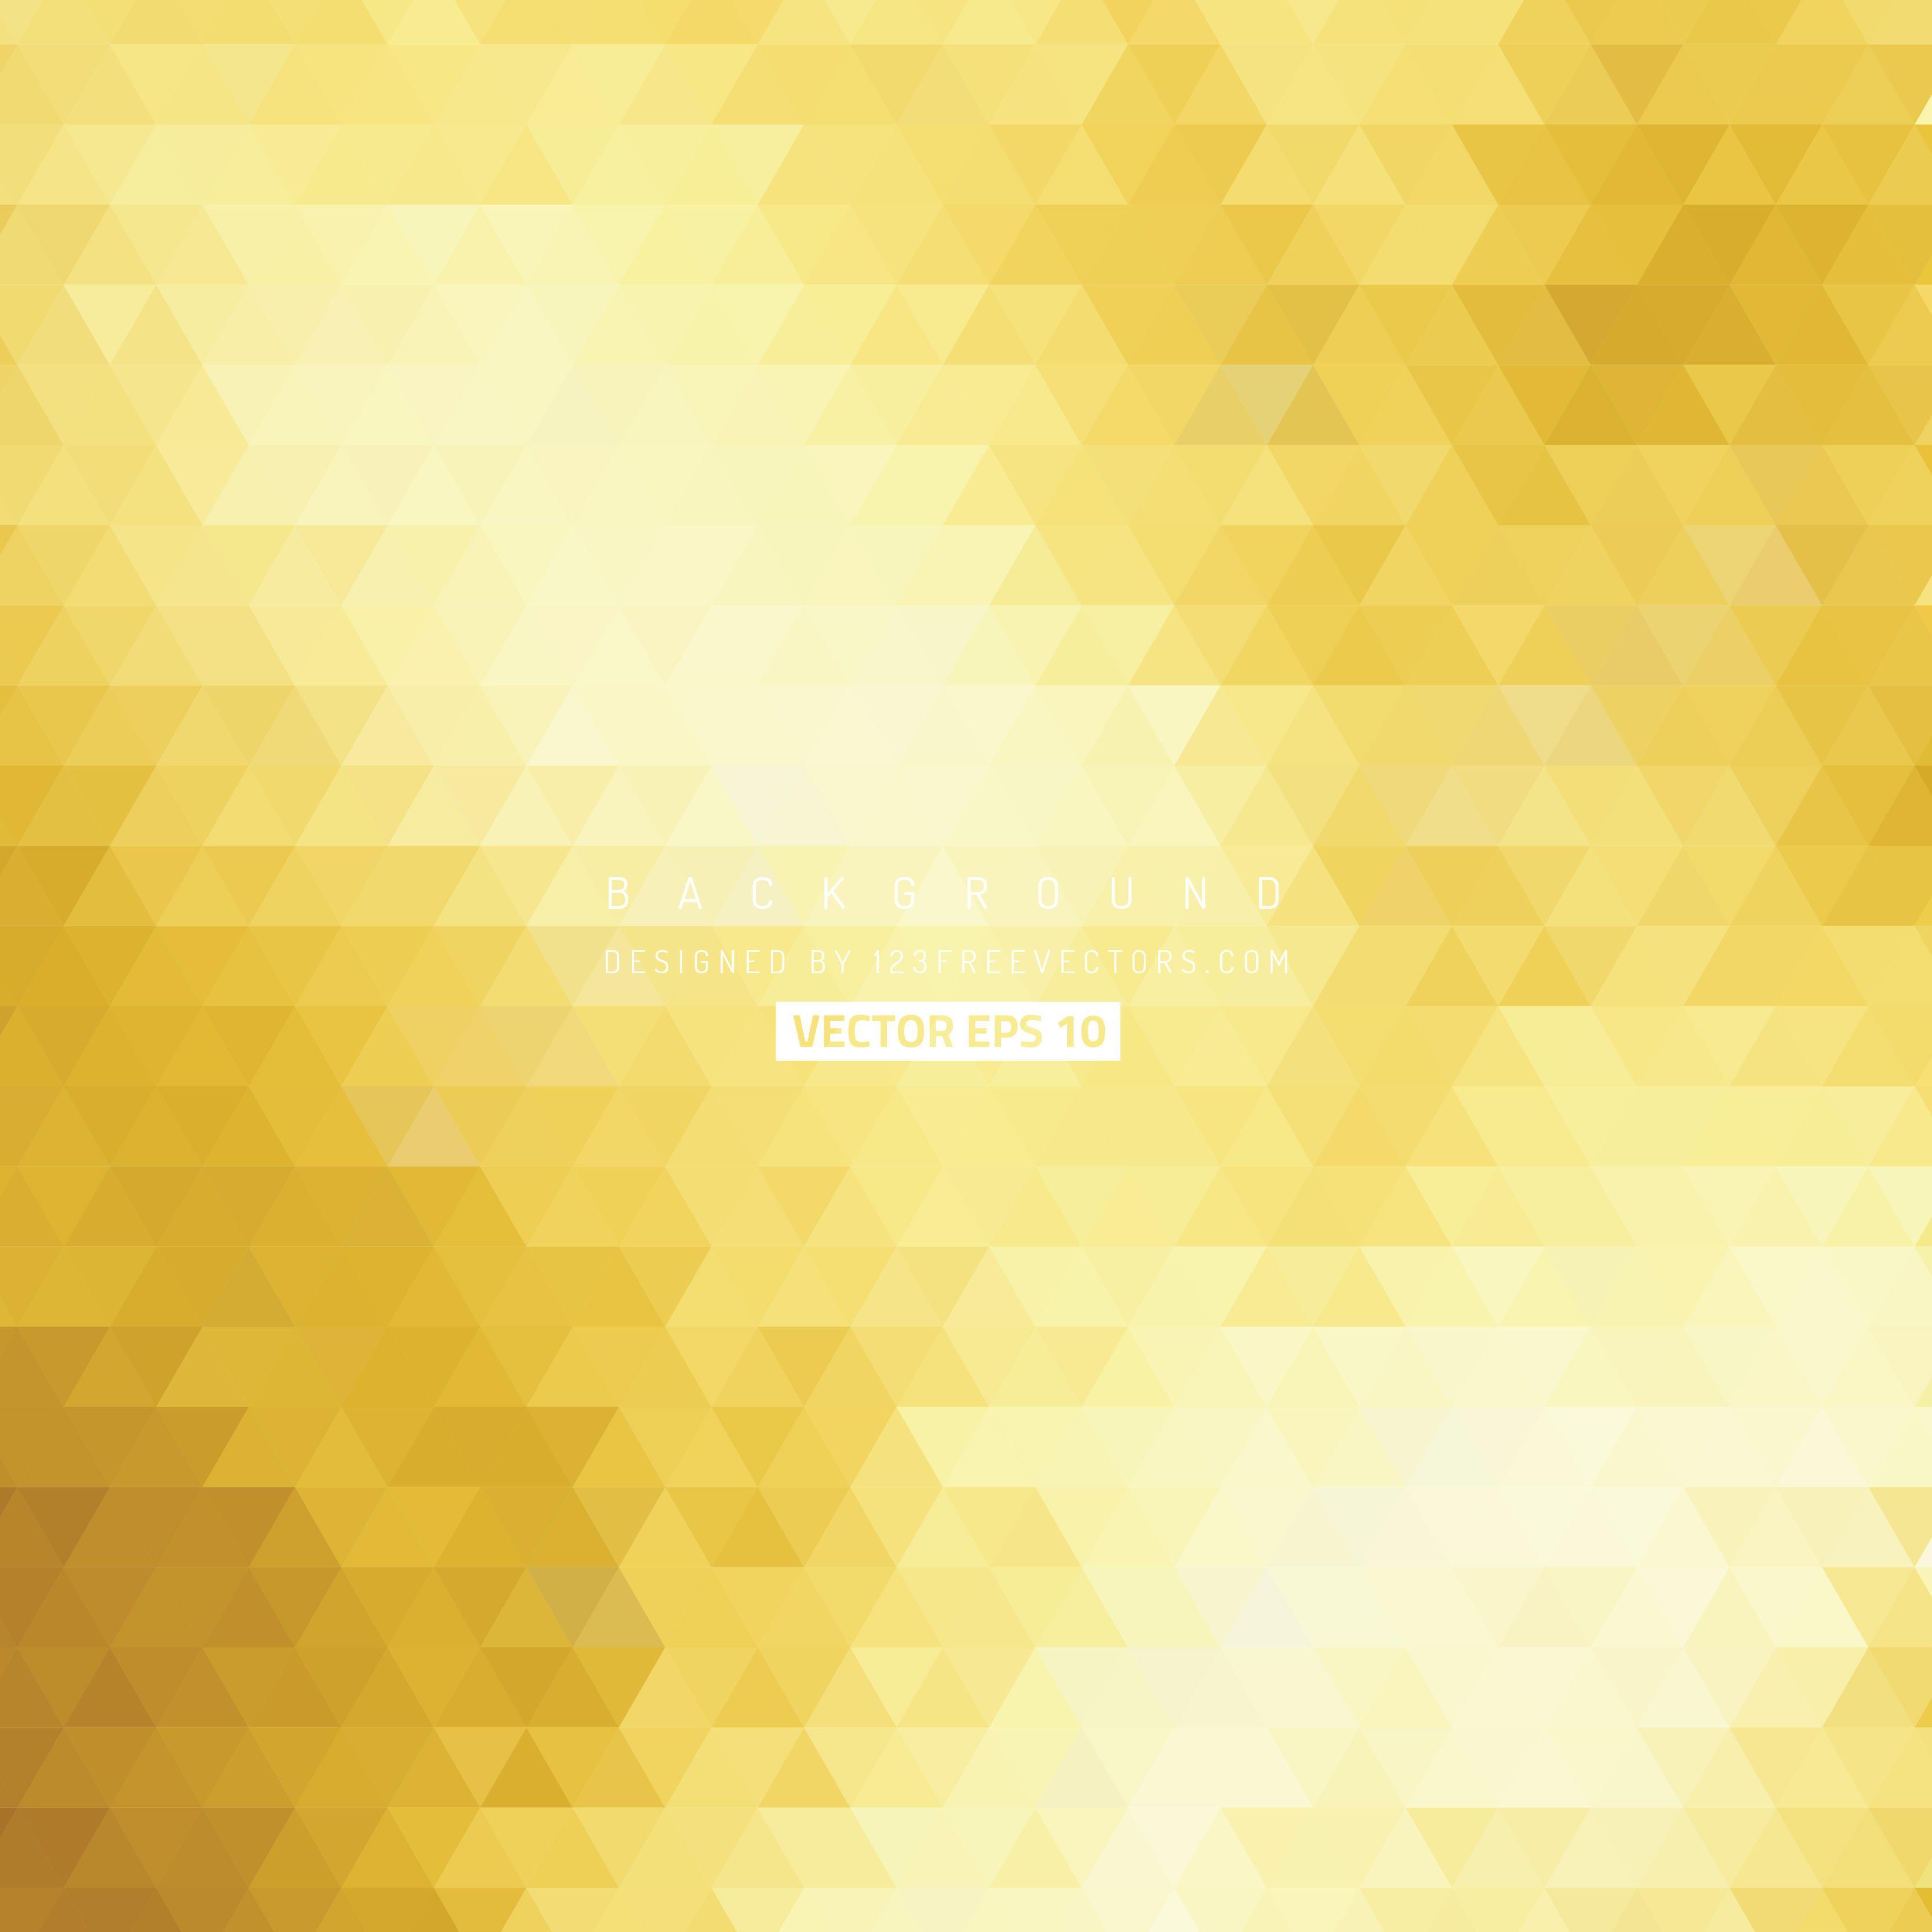 Metallic Gold Color Triangle BackgroundFreevectors